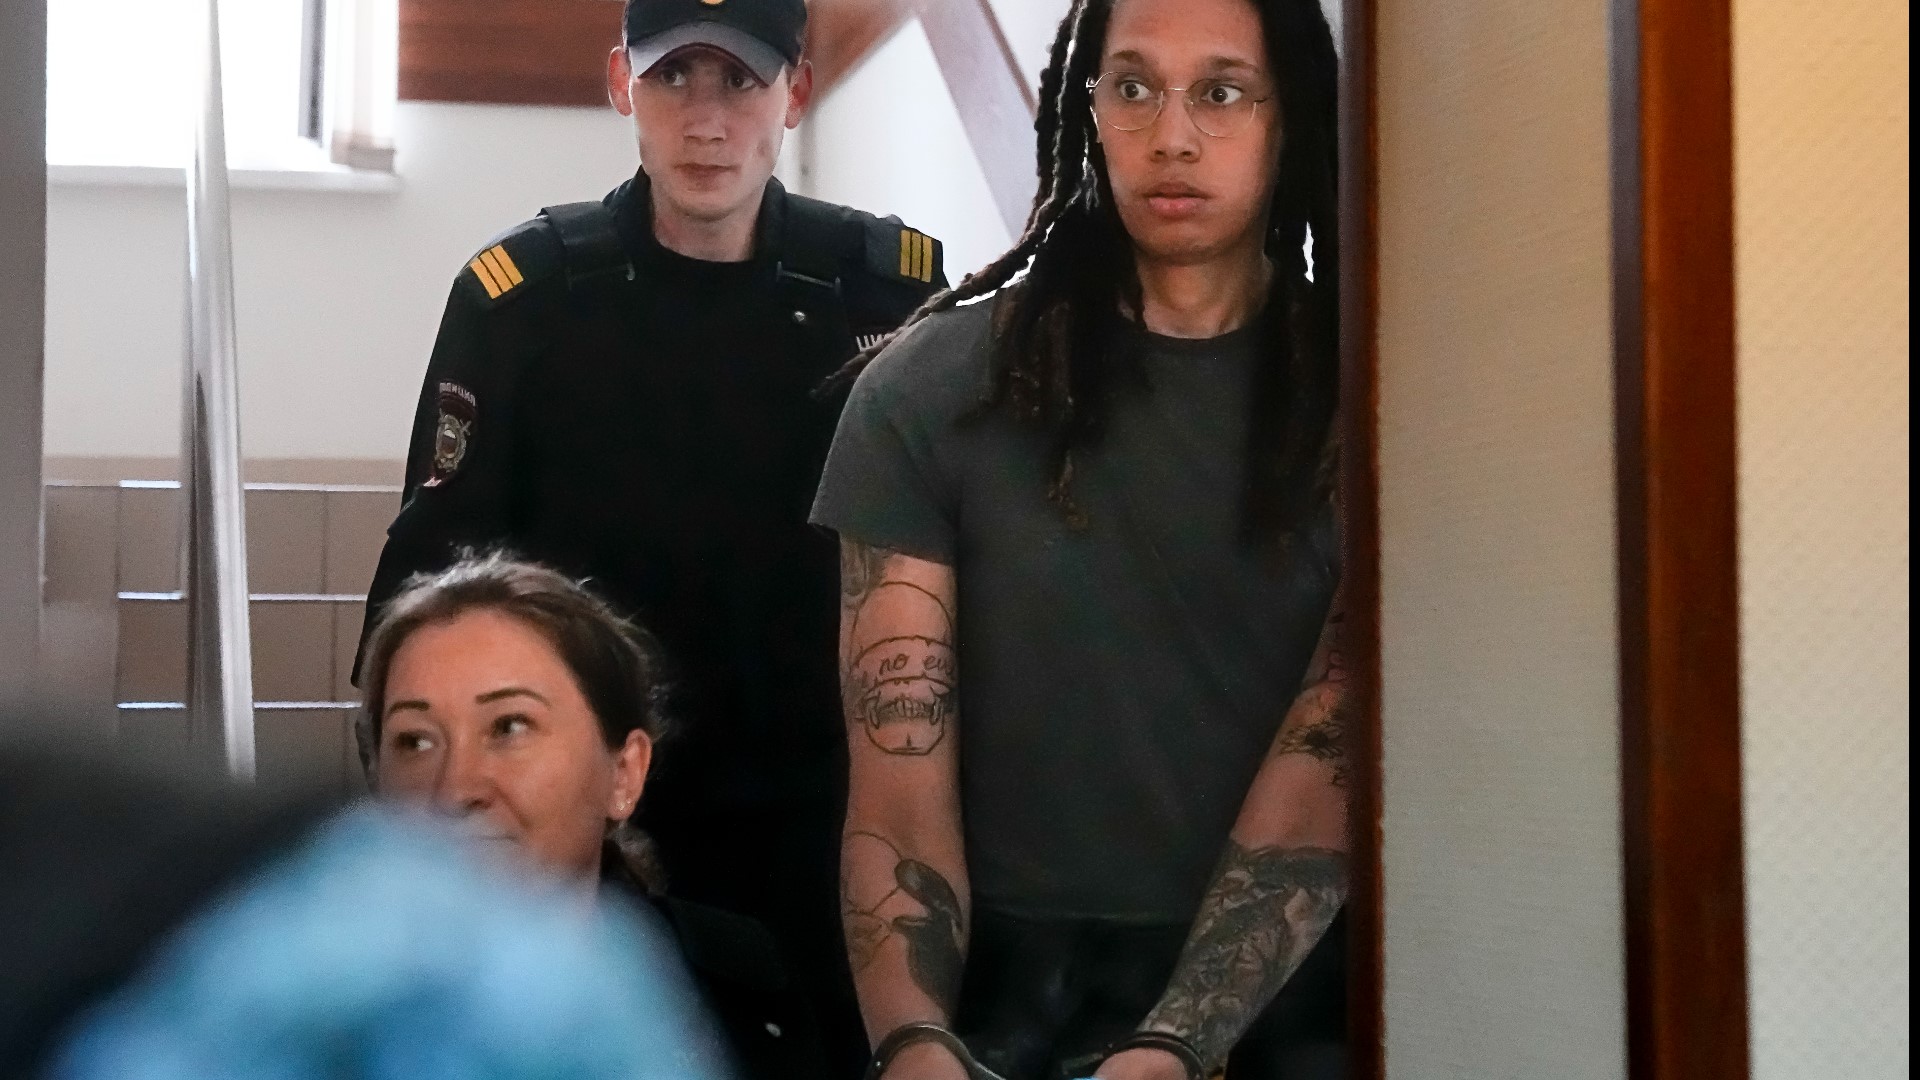 More than four months after she was arrested at a Moscow airport for cannabis possession, Brittney Griner appeared for a preliminary hearing Monday.